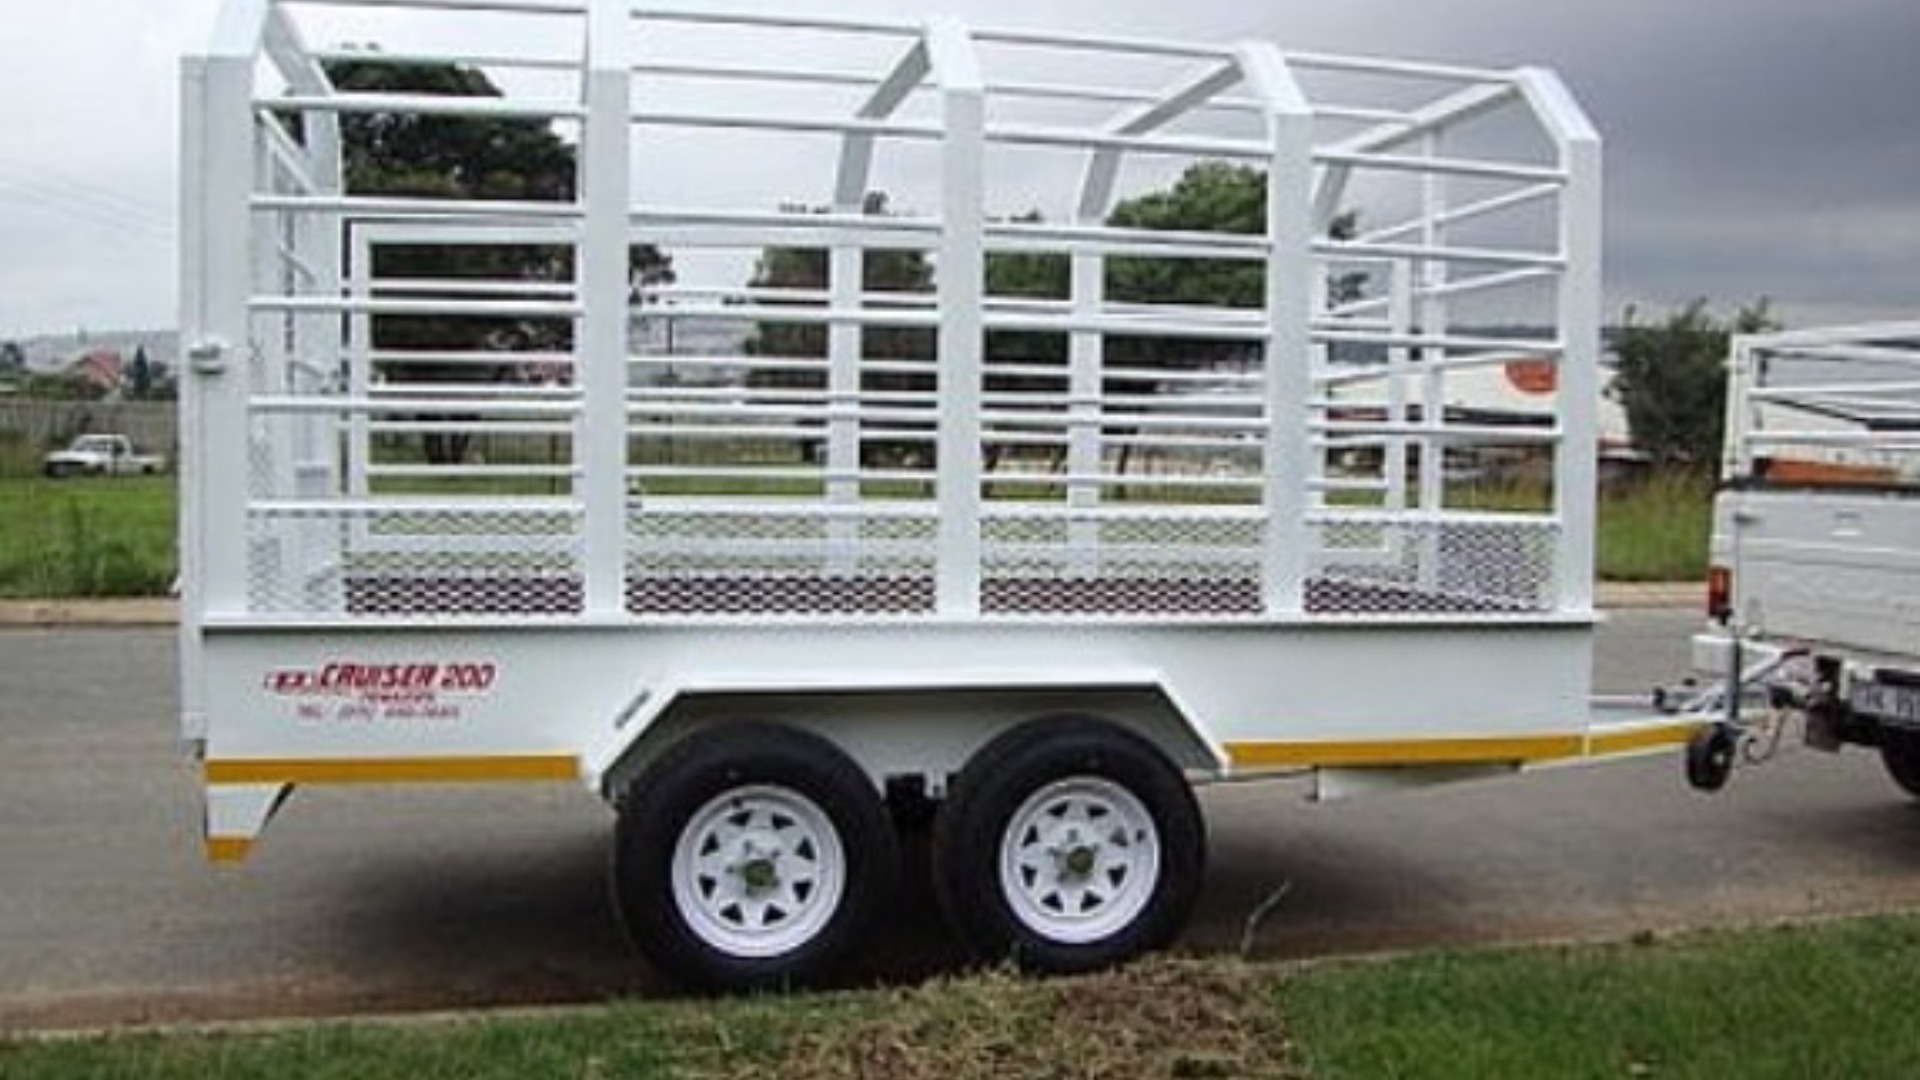 Custom Trailers Cattle Trailers Available In Various Sizes!!! 2021 for sale by Jikelele Tankers and Trailers   | Truck & Trailer Marketplaces